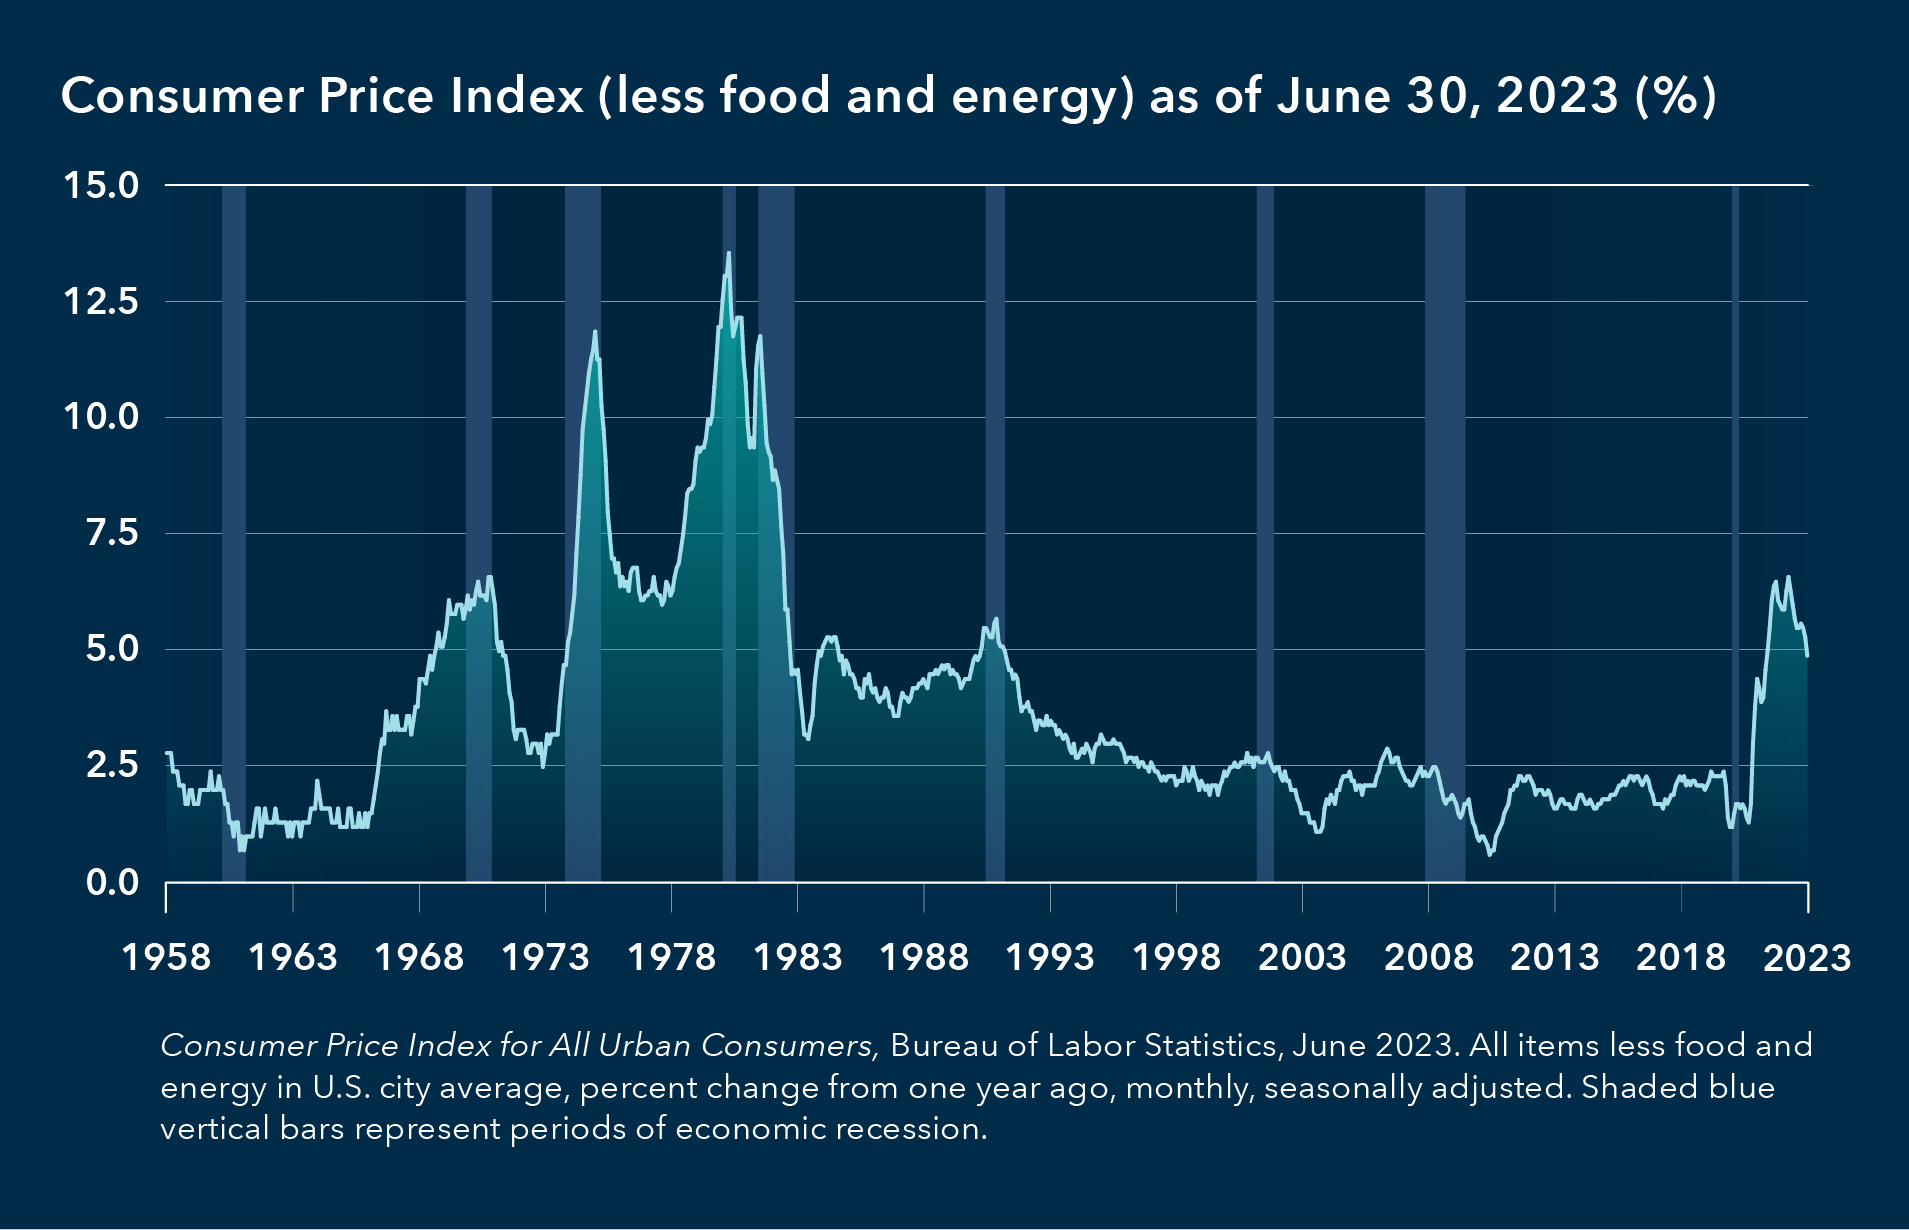 A line chart depicts the seasonally adjusted year-over-year percent change in the Consumer Price Index for All Urban Consumers, including all items less food and energy in U.S. city average on a monthly basis from the data series' inception in January 1958 through June 2023. Periods of economic recession are indicated on chart via dark blue vertical shading corresponding to the periods of April 1961 through February 1961, December 1969 through November 1970, November 1973 through March 1975, January 1980 through July 1980. July 1981 through November 1982, July 1990 through March 1991, March 2001 through November 2001, December 2007 through June 2009, and February 2020 through June 2020. From a starting point of 2.8% in January 1958, the year-over-year percent change initially declines through June 1966, before spiking to highs of 11.9% in February 1975 and 13.6% in June 1980. From there, the inflation rate broadly declines through early 2021 and then rapidly increases through the remainder of the year and much of 2022, ending at 4.9% in June 2023. 